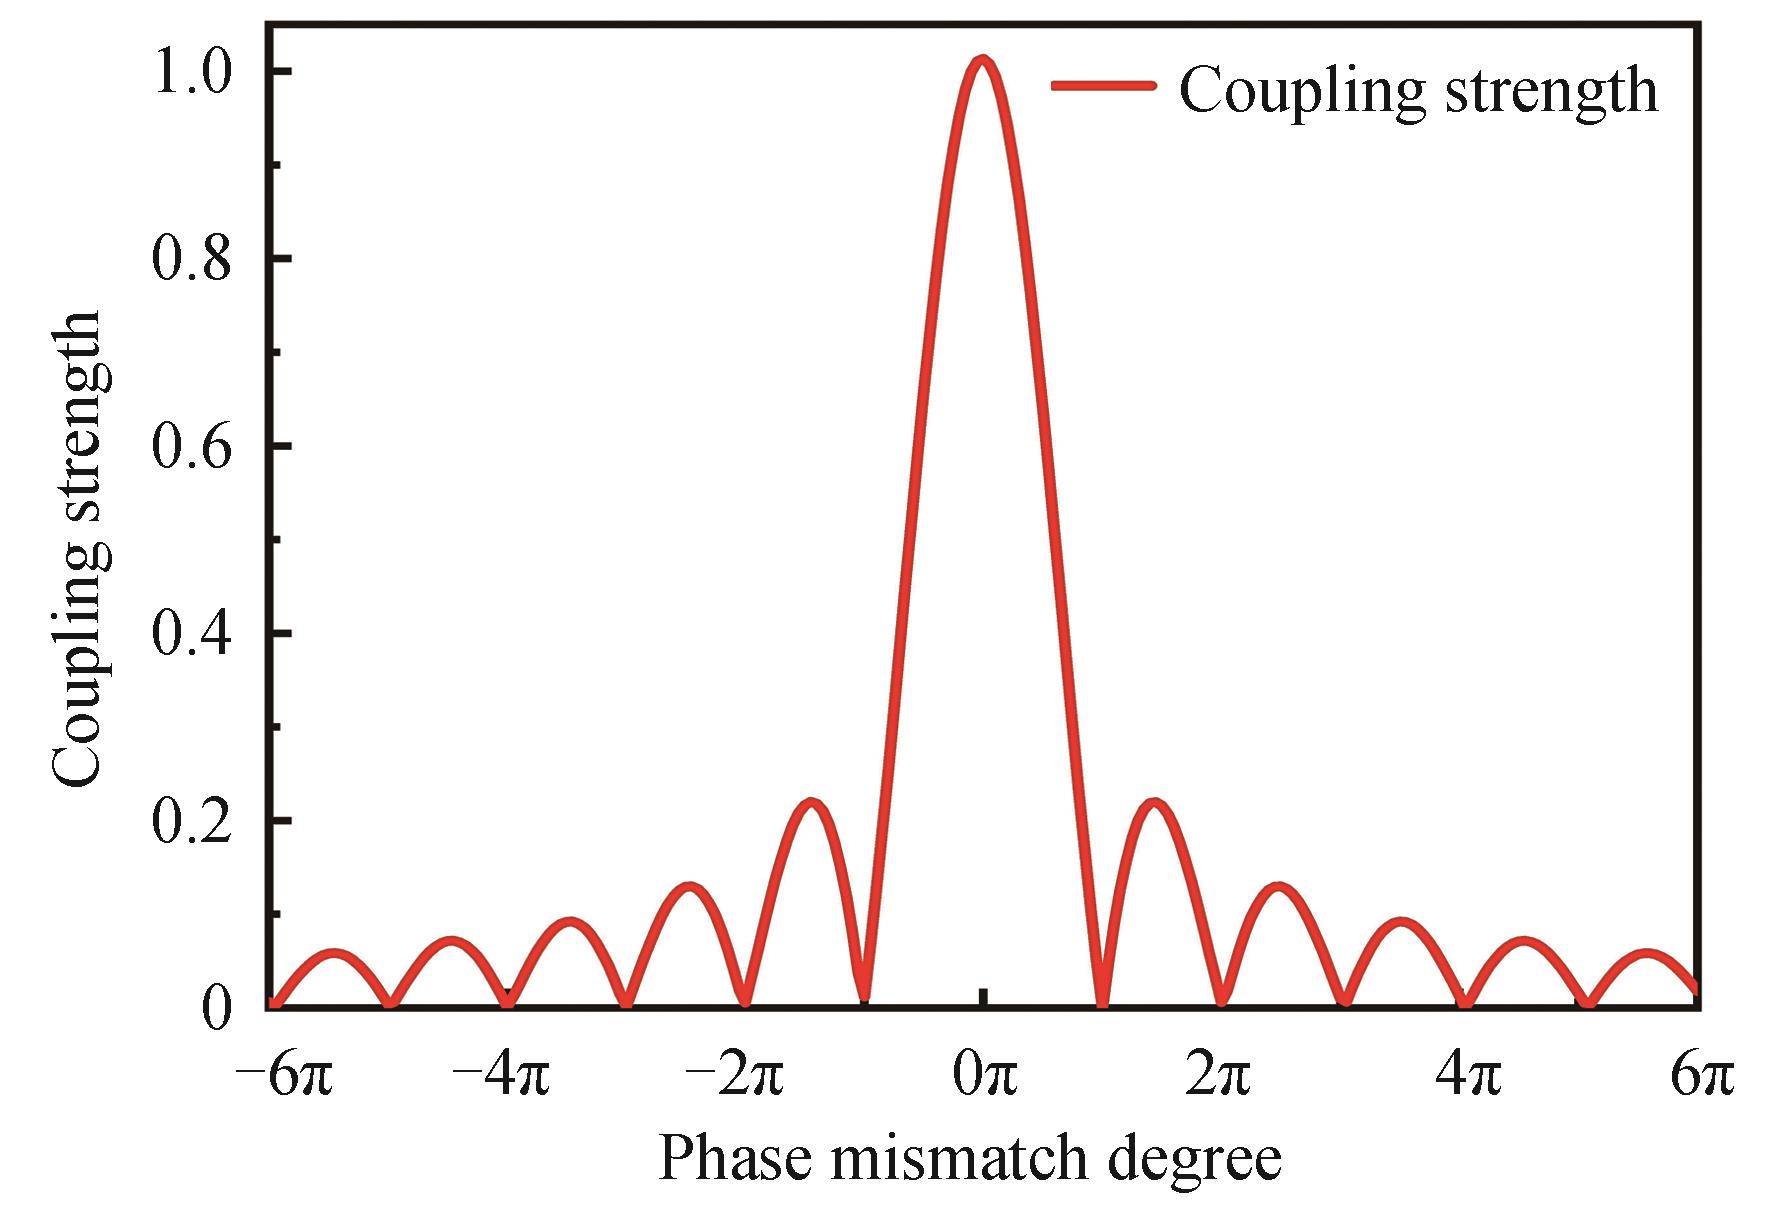 Relationship between coupling strength and phase mismatch